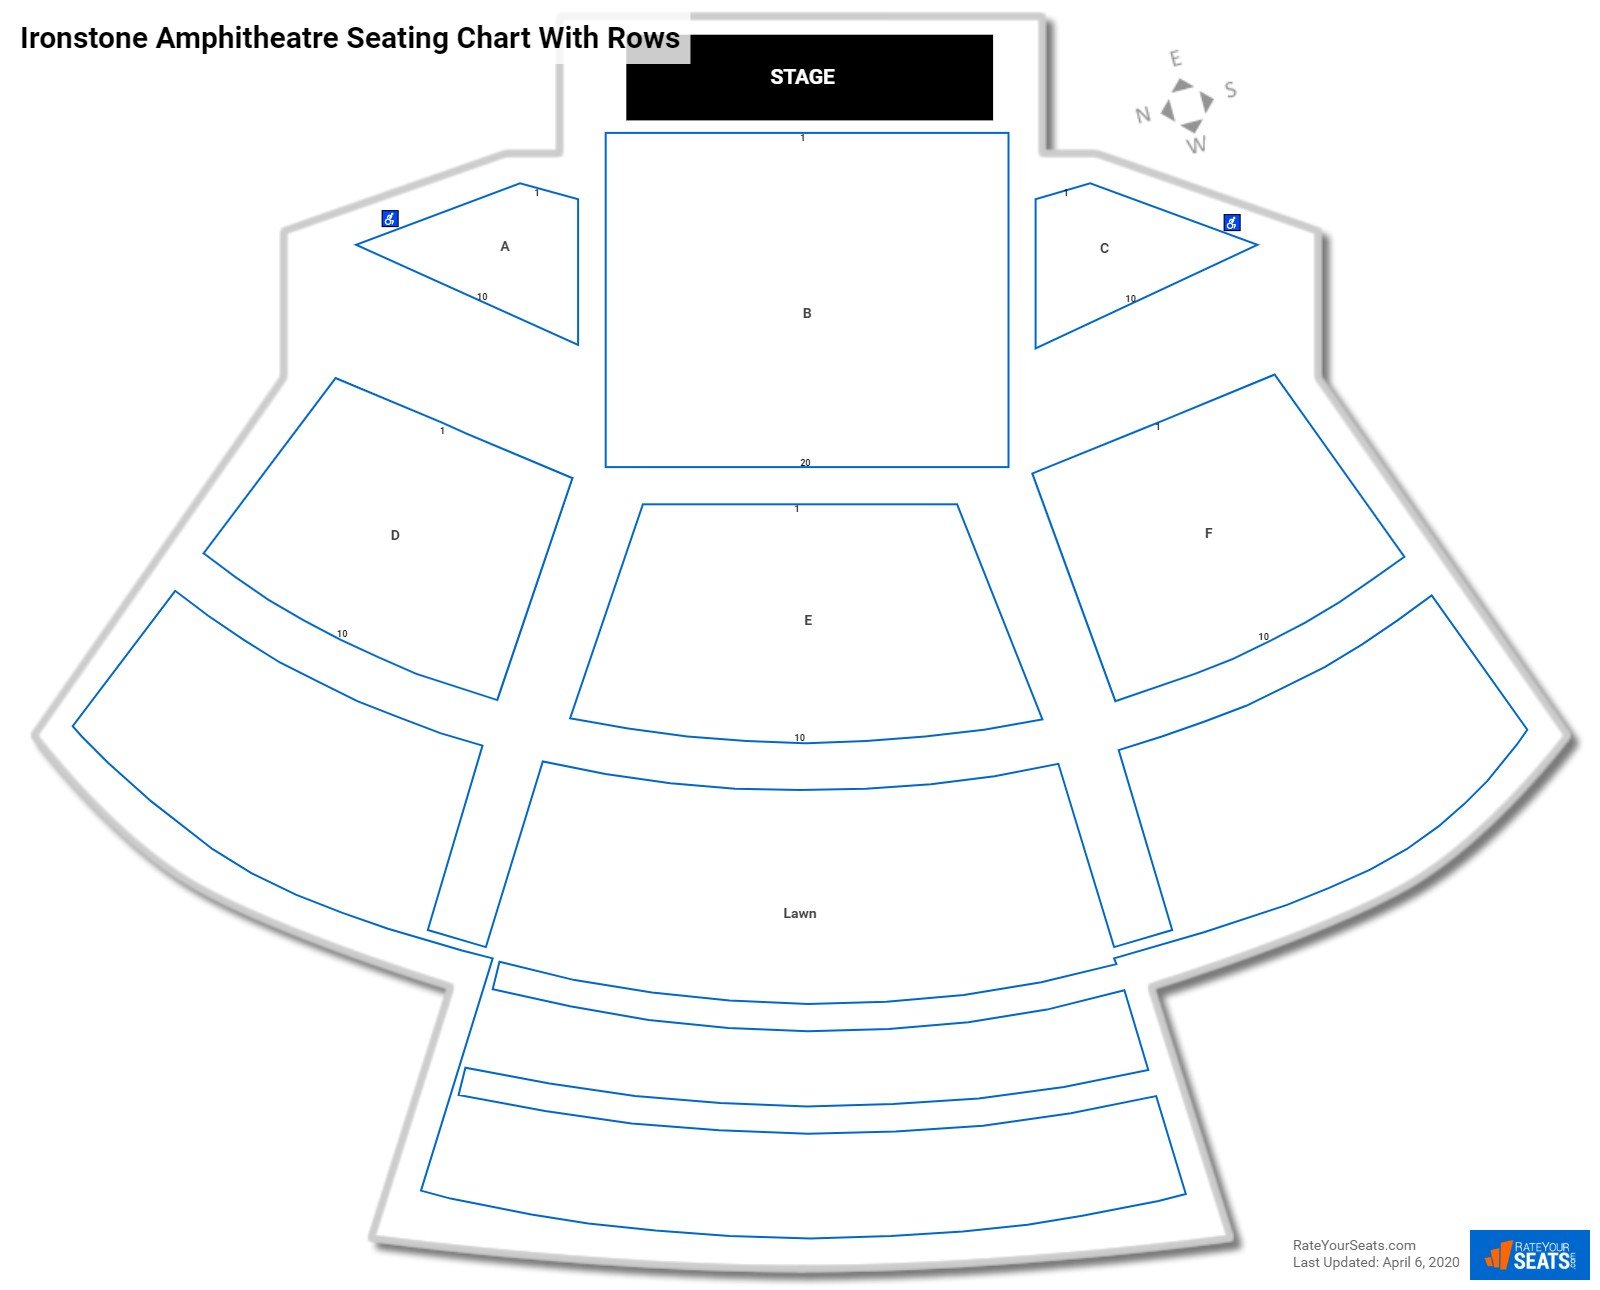 Ironstone Amphitheatre seating chart with row numbers